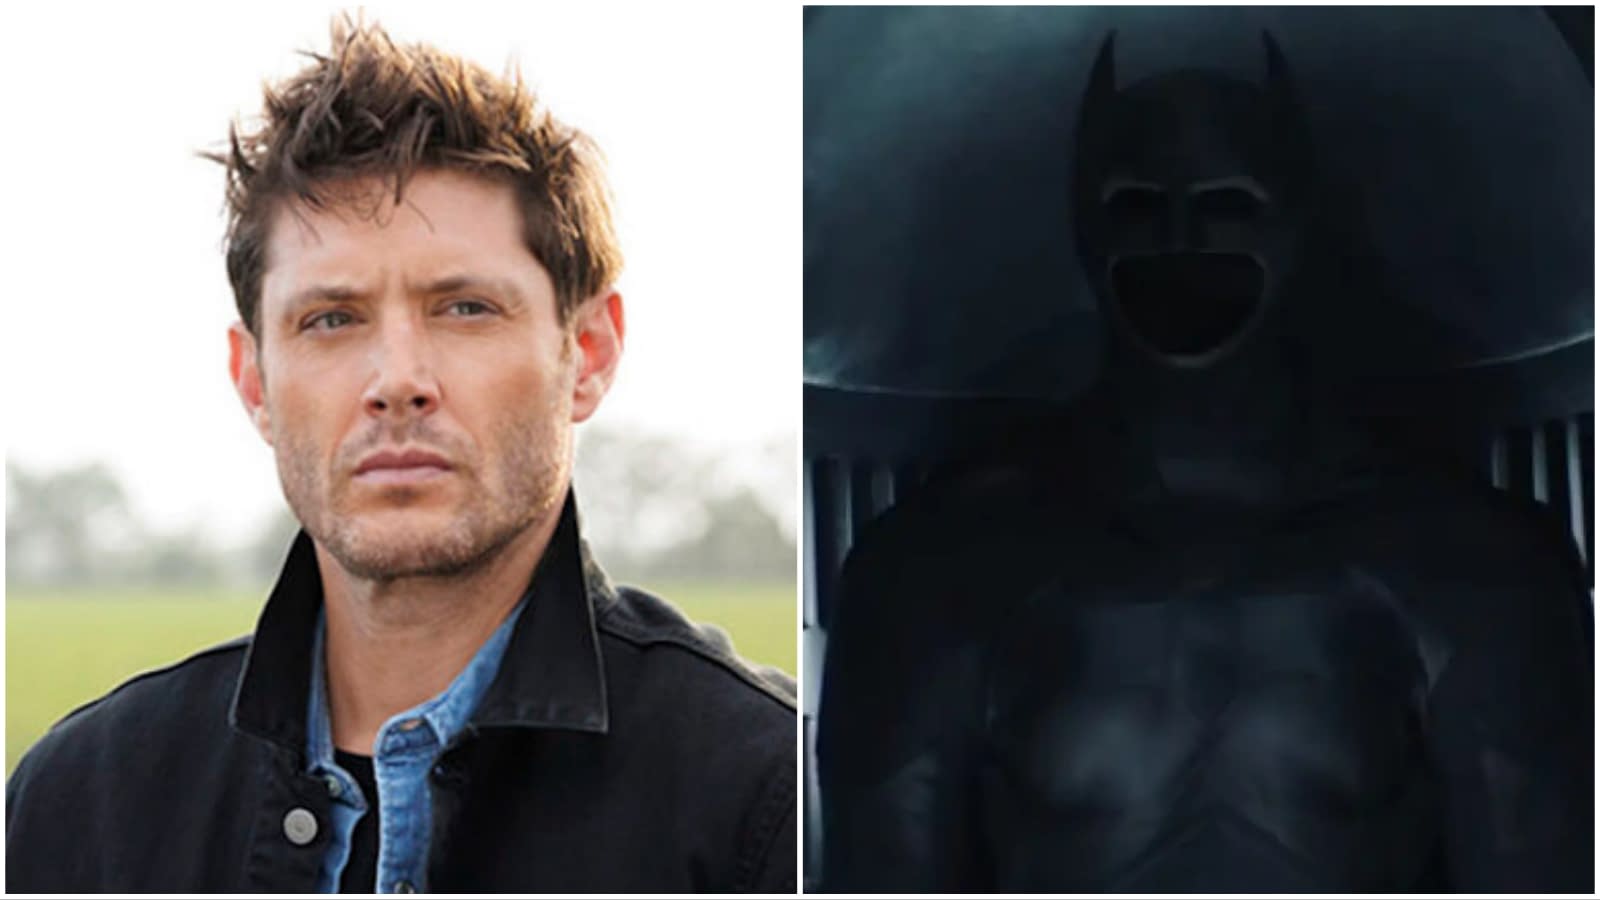 GOTHAM KNIGHTS Is Canceled at The CW, but Did it Give Us Misha Collins as  Two-Face?